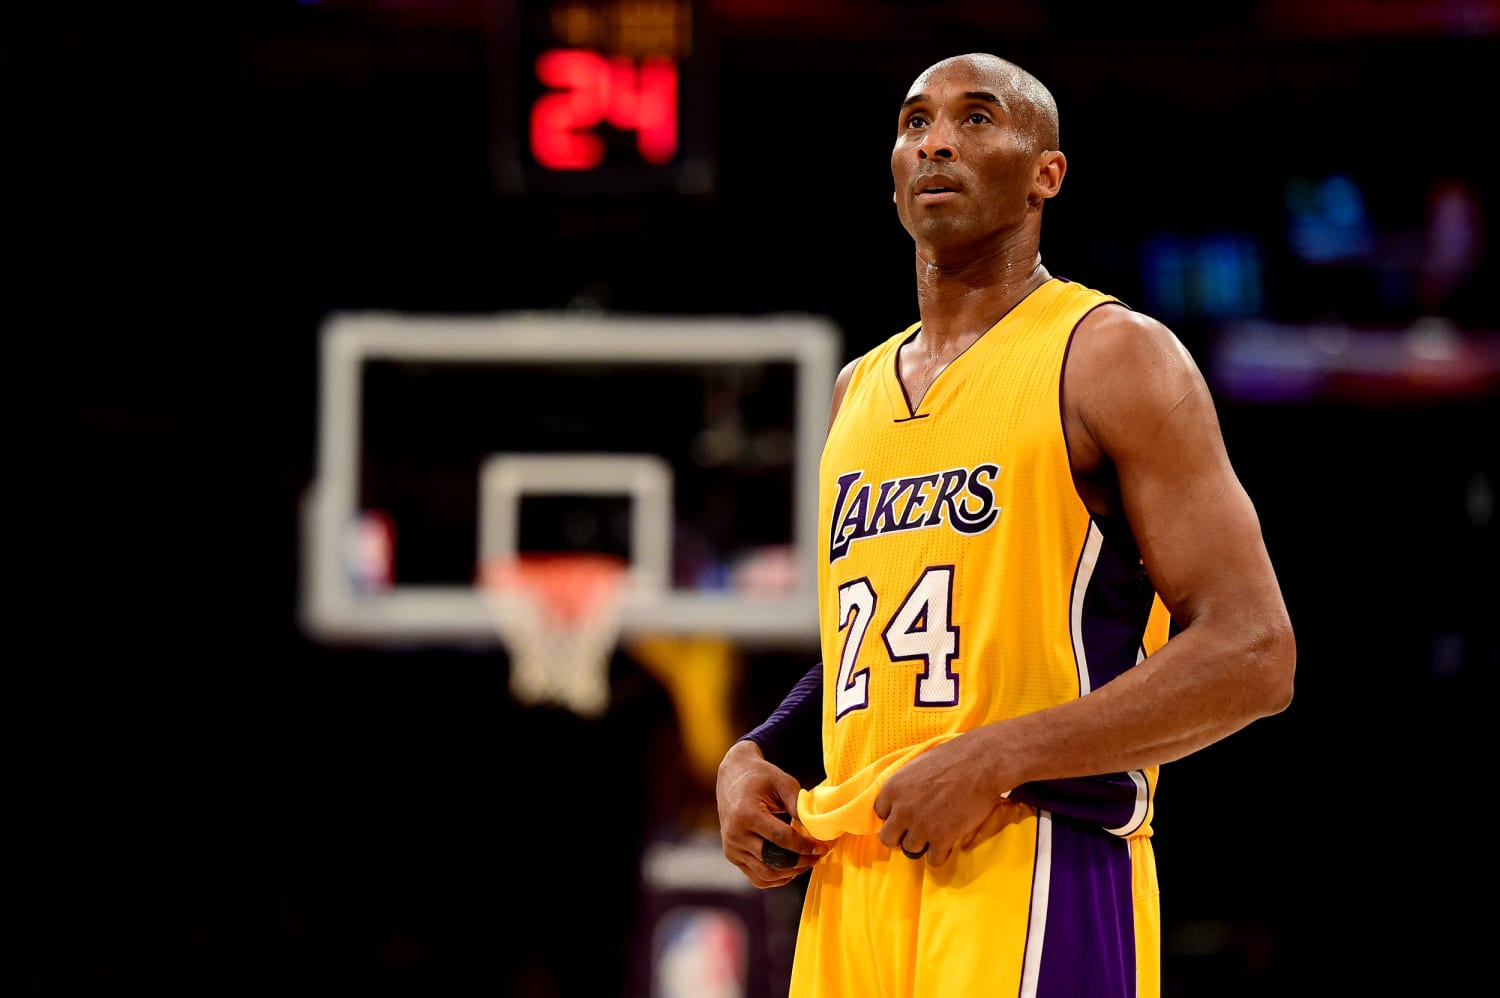 Kobe Bryant dead: Los Angeles Lakers star in helicopter crash in